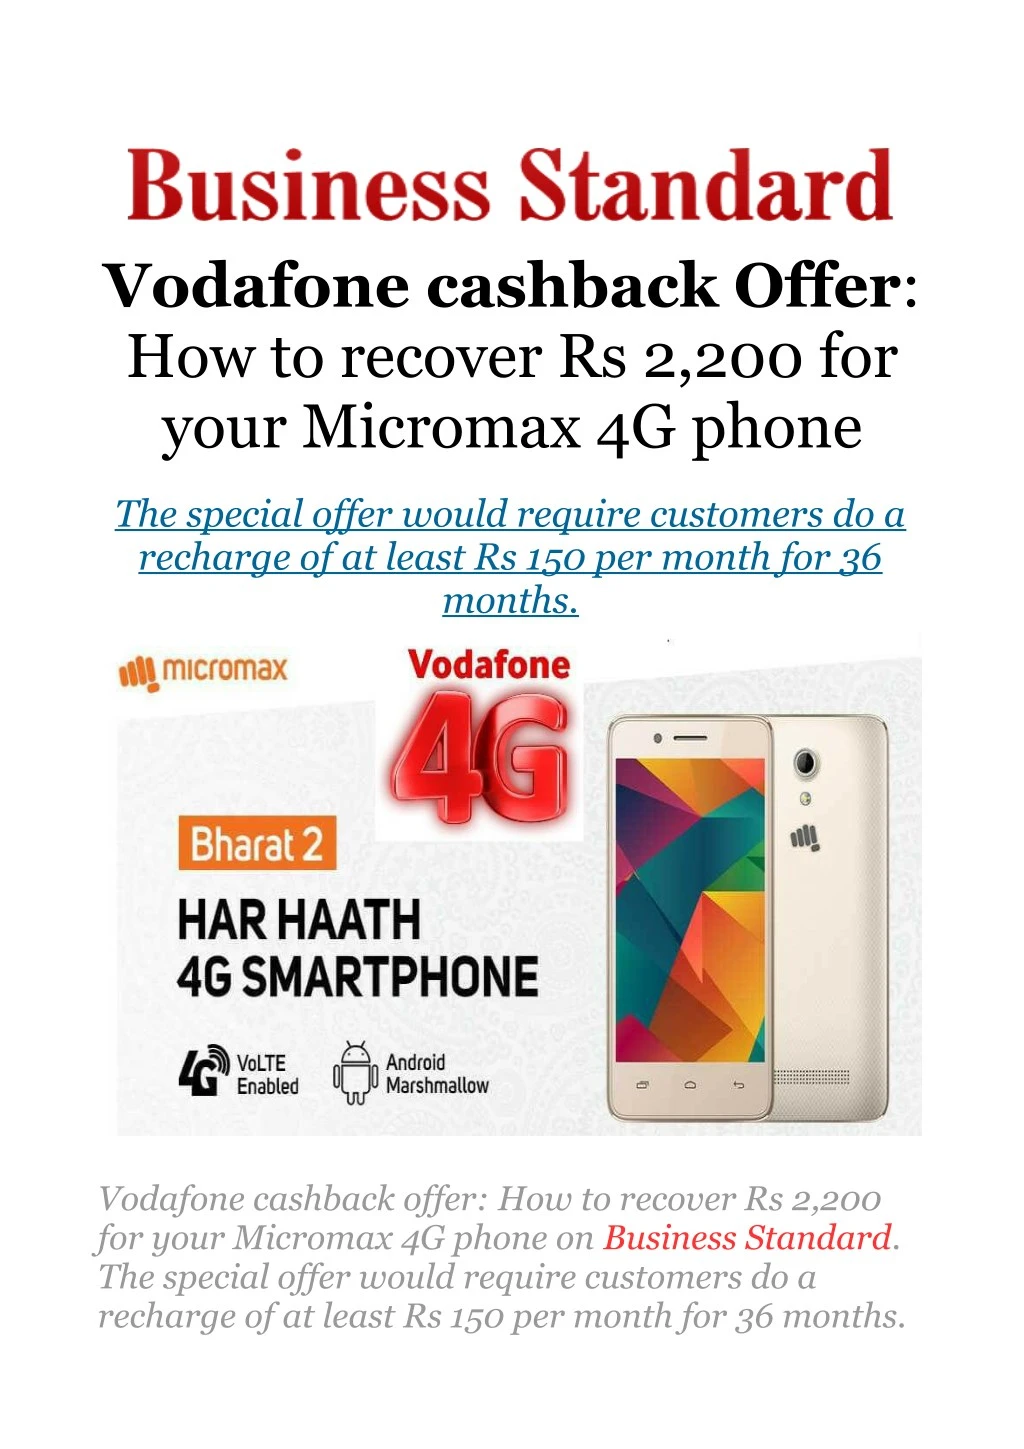 vodafone cashback offer how to recover